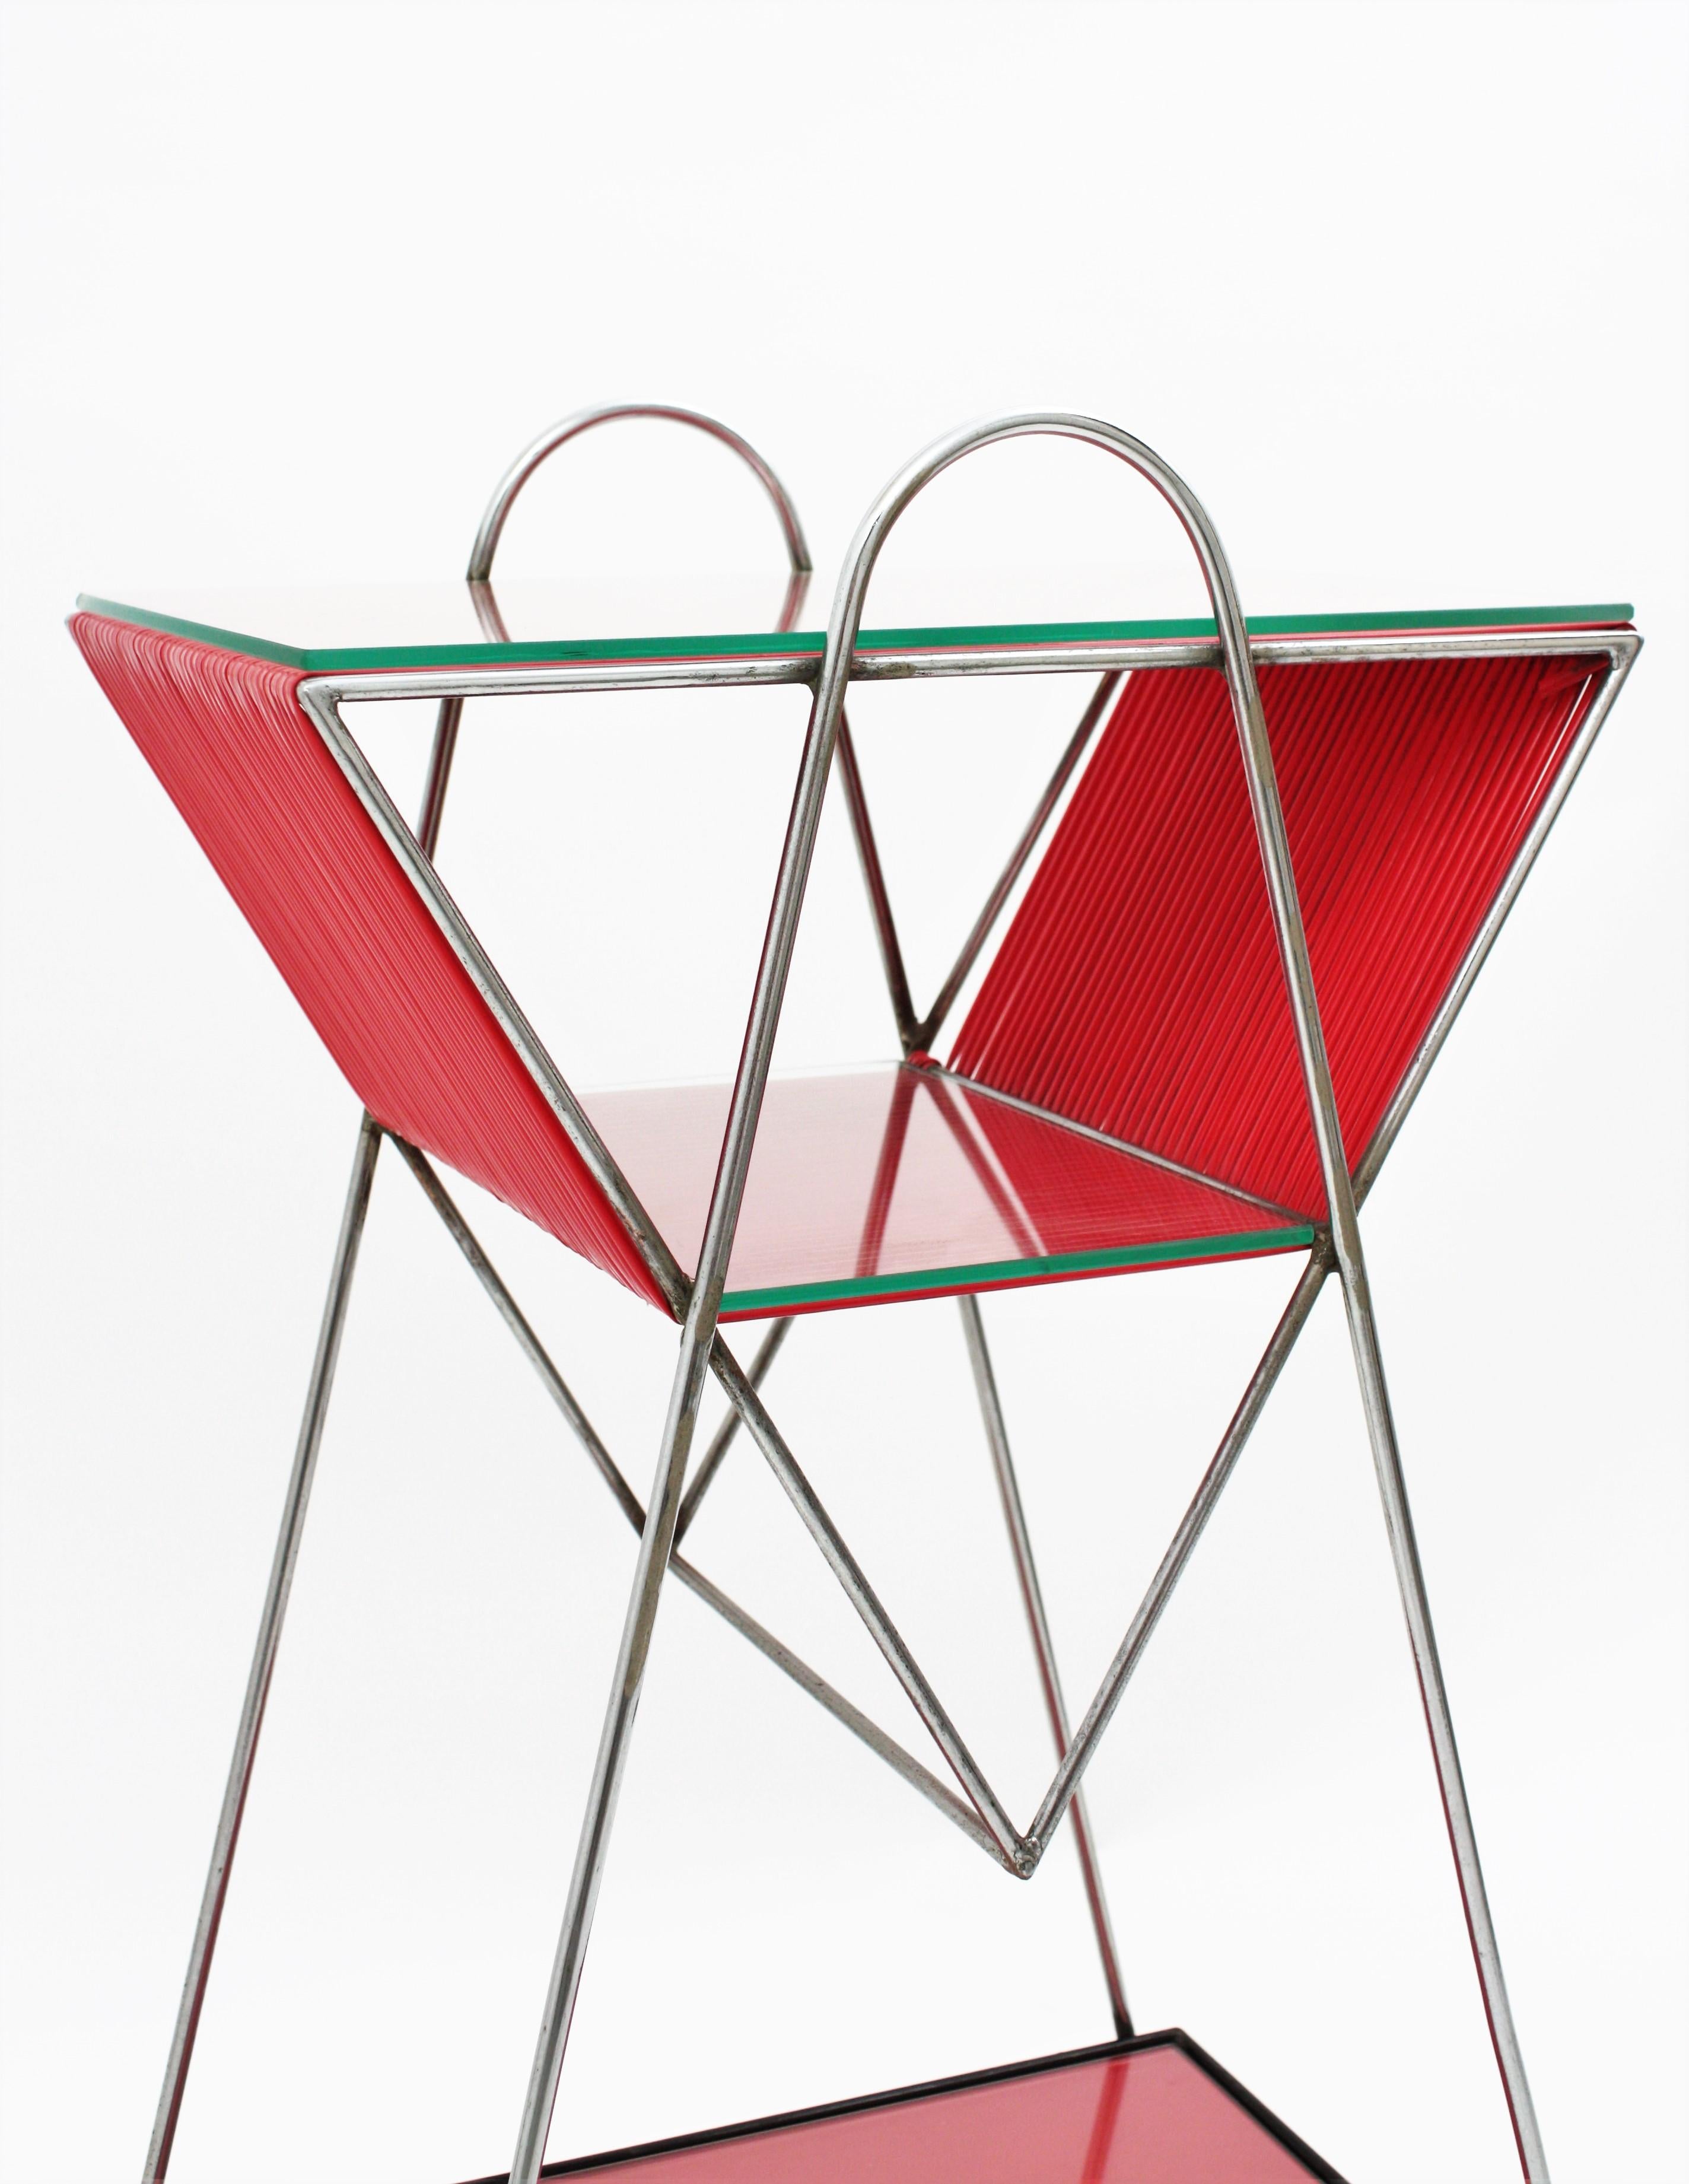 French Mid-Century Modern Chrome and Red Scoubidou Side Table, France, 1950s